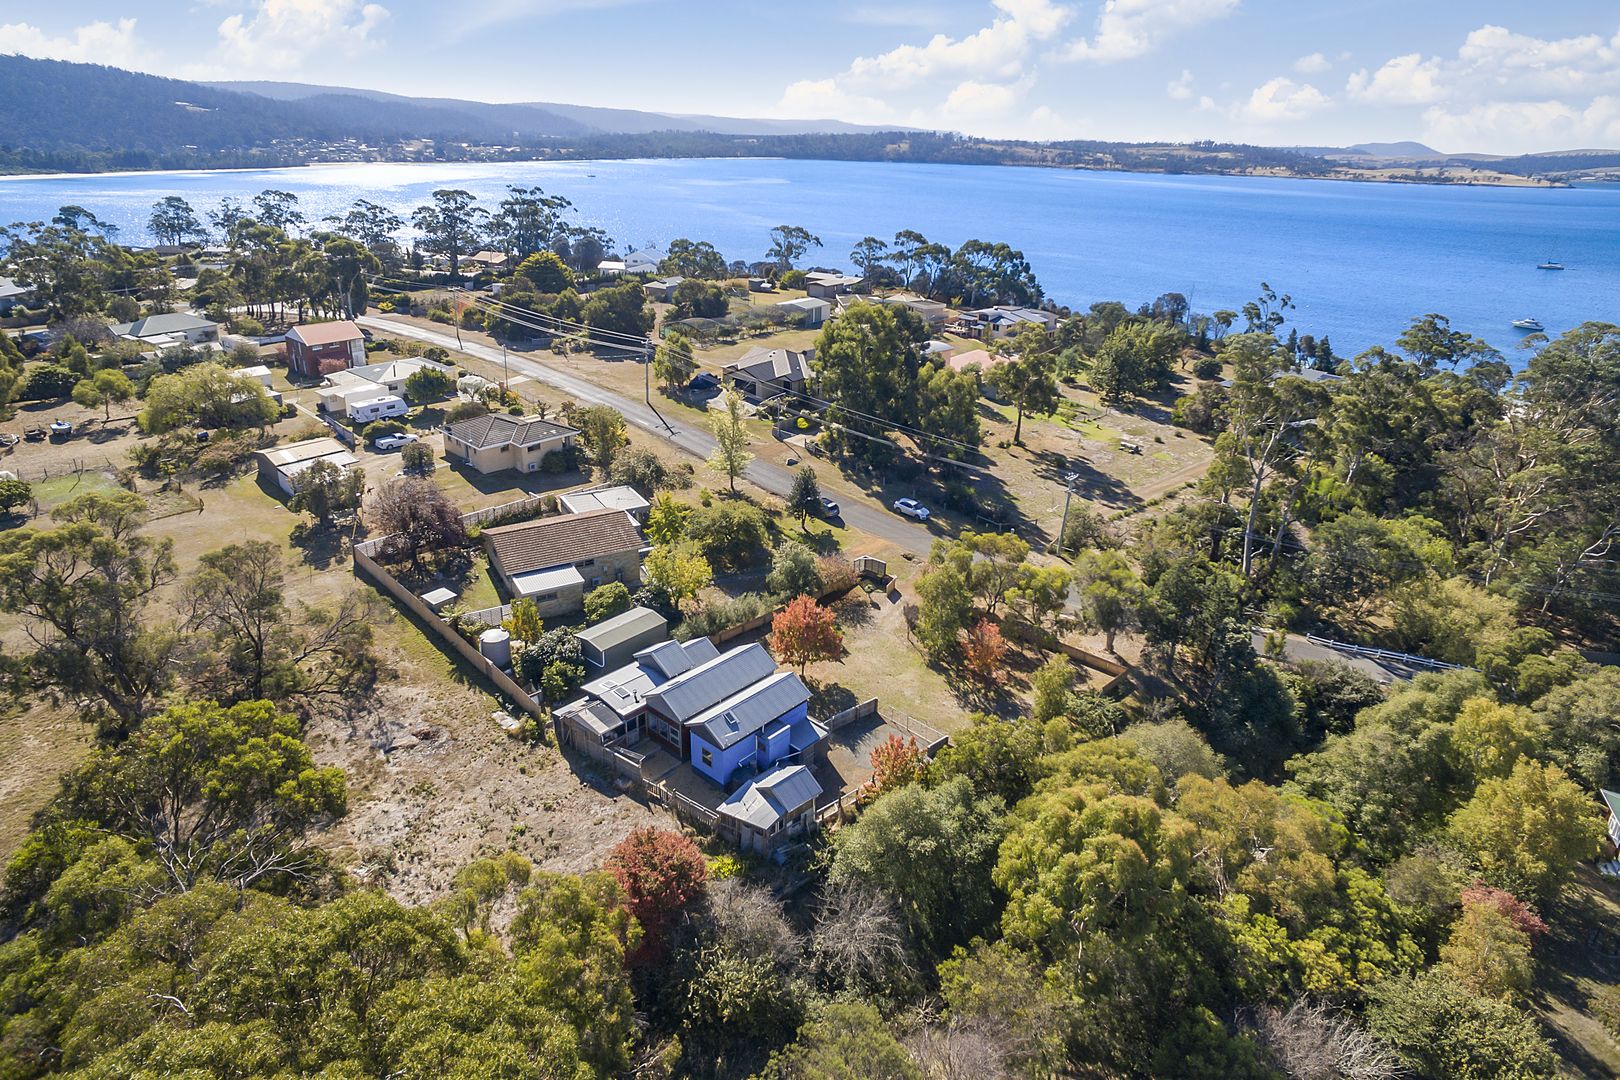 10 East Shelly Road, Orford TAS 7190